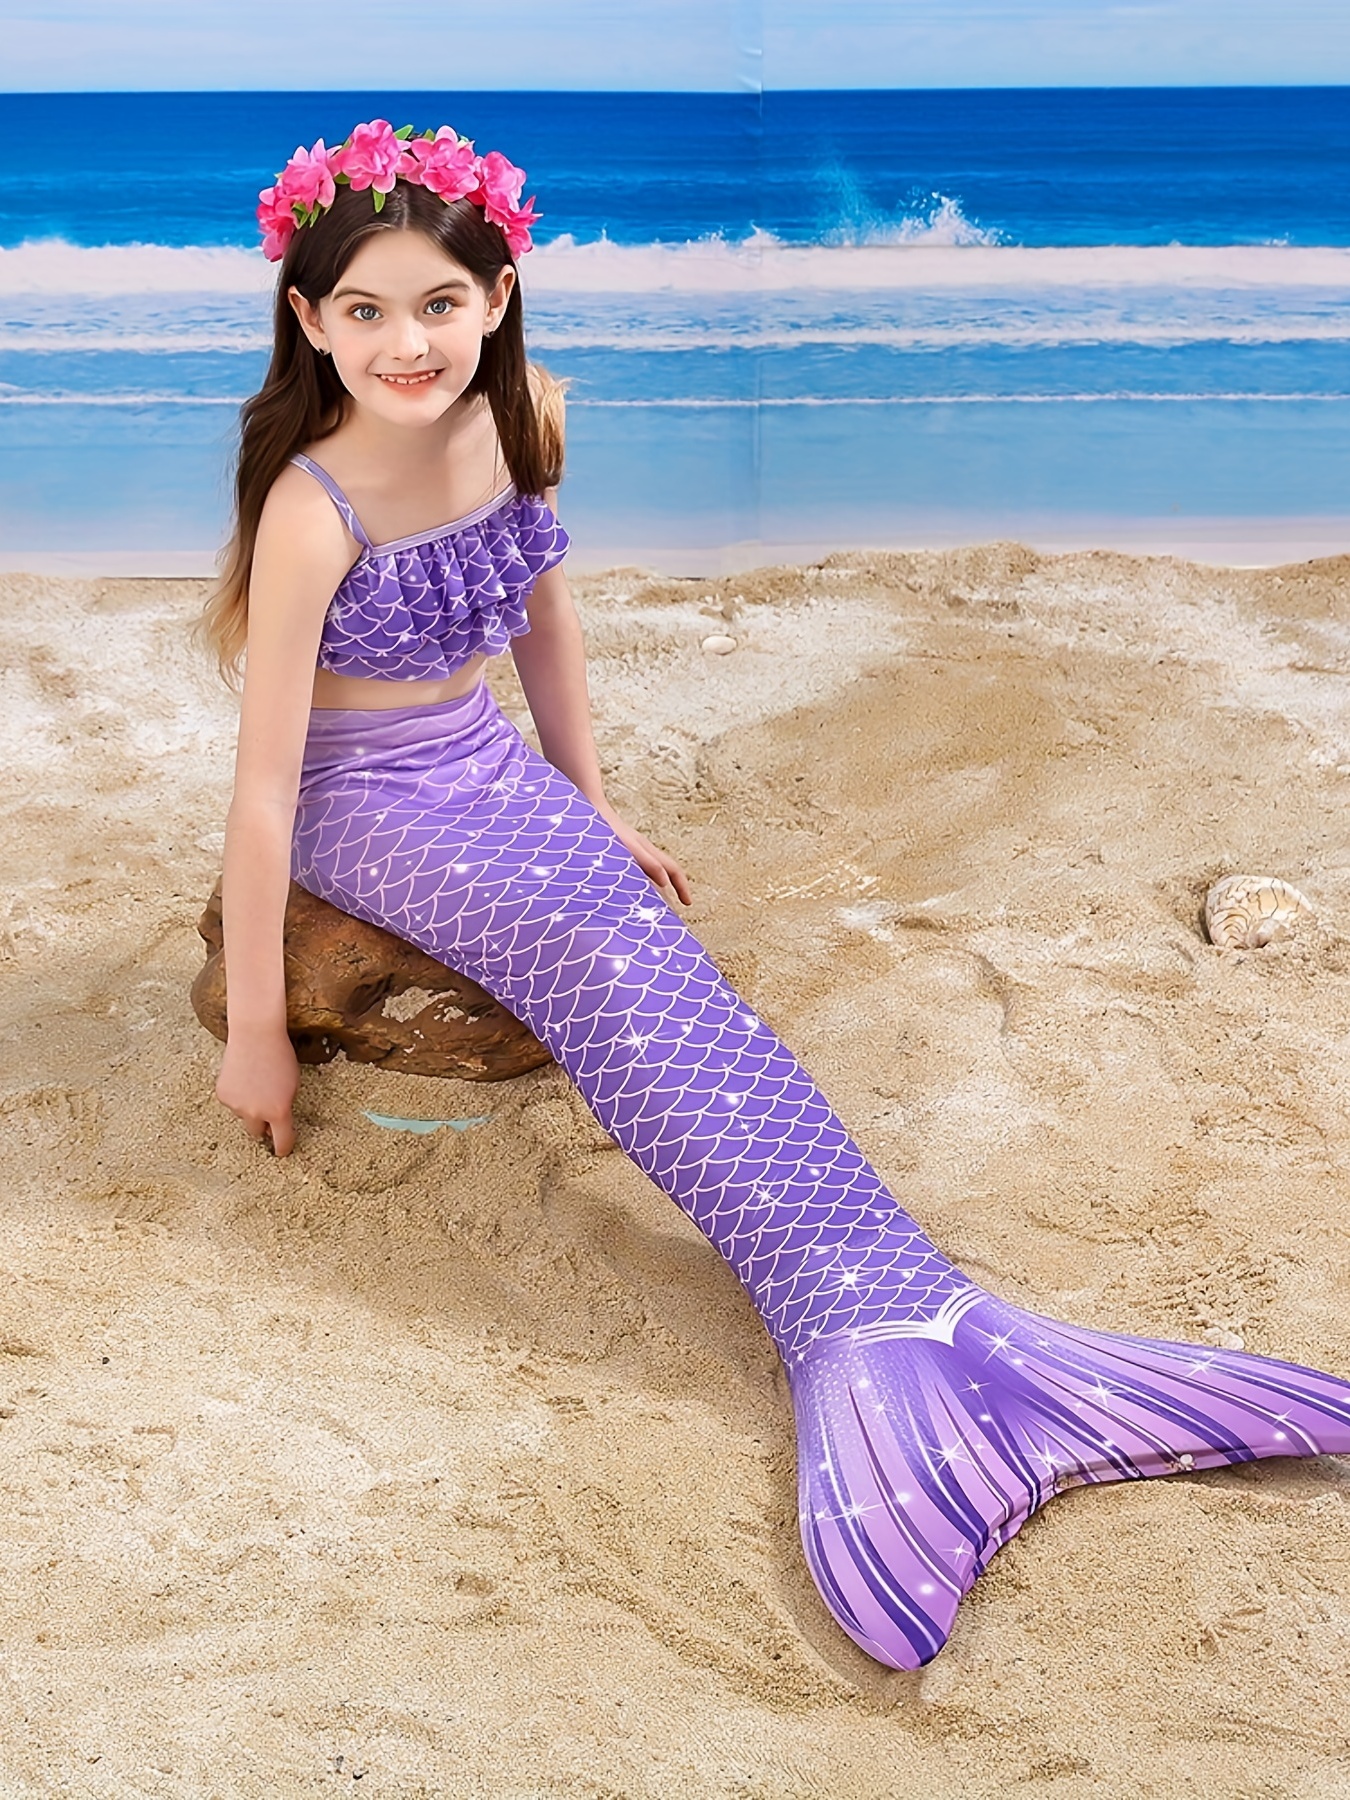  Mermaid Glitter Scales Swimsuit for Women,Sexy